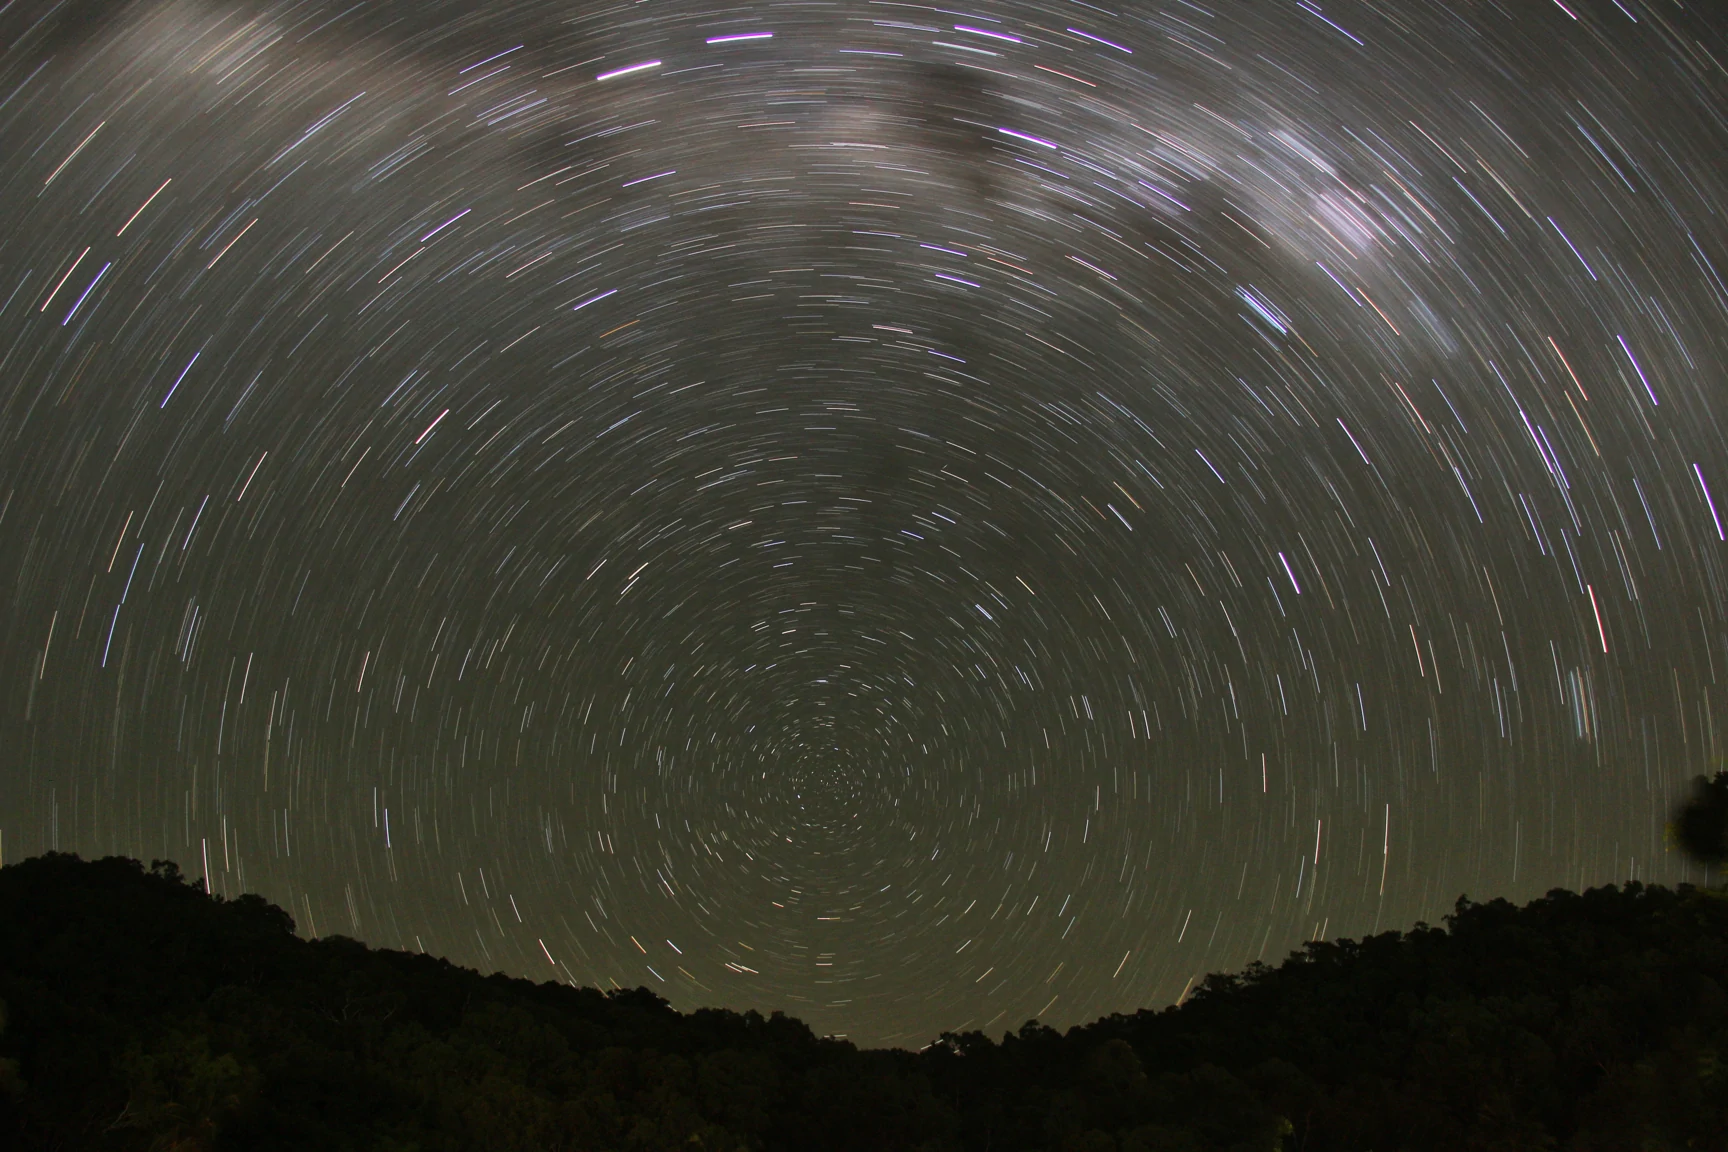 Long exposure picture of stars. The trajectories of each star is visible, creating many circular lines.